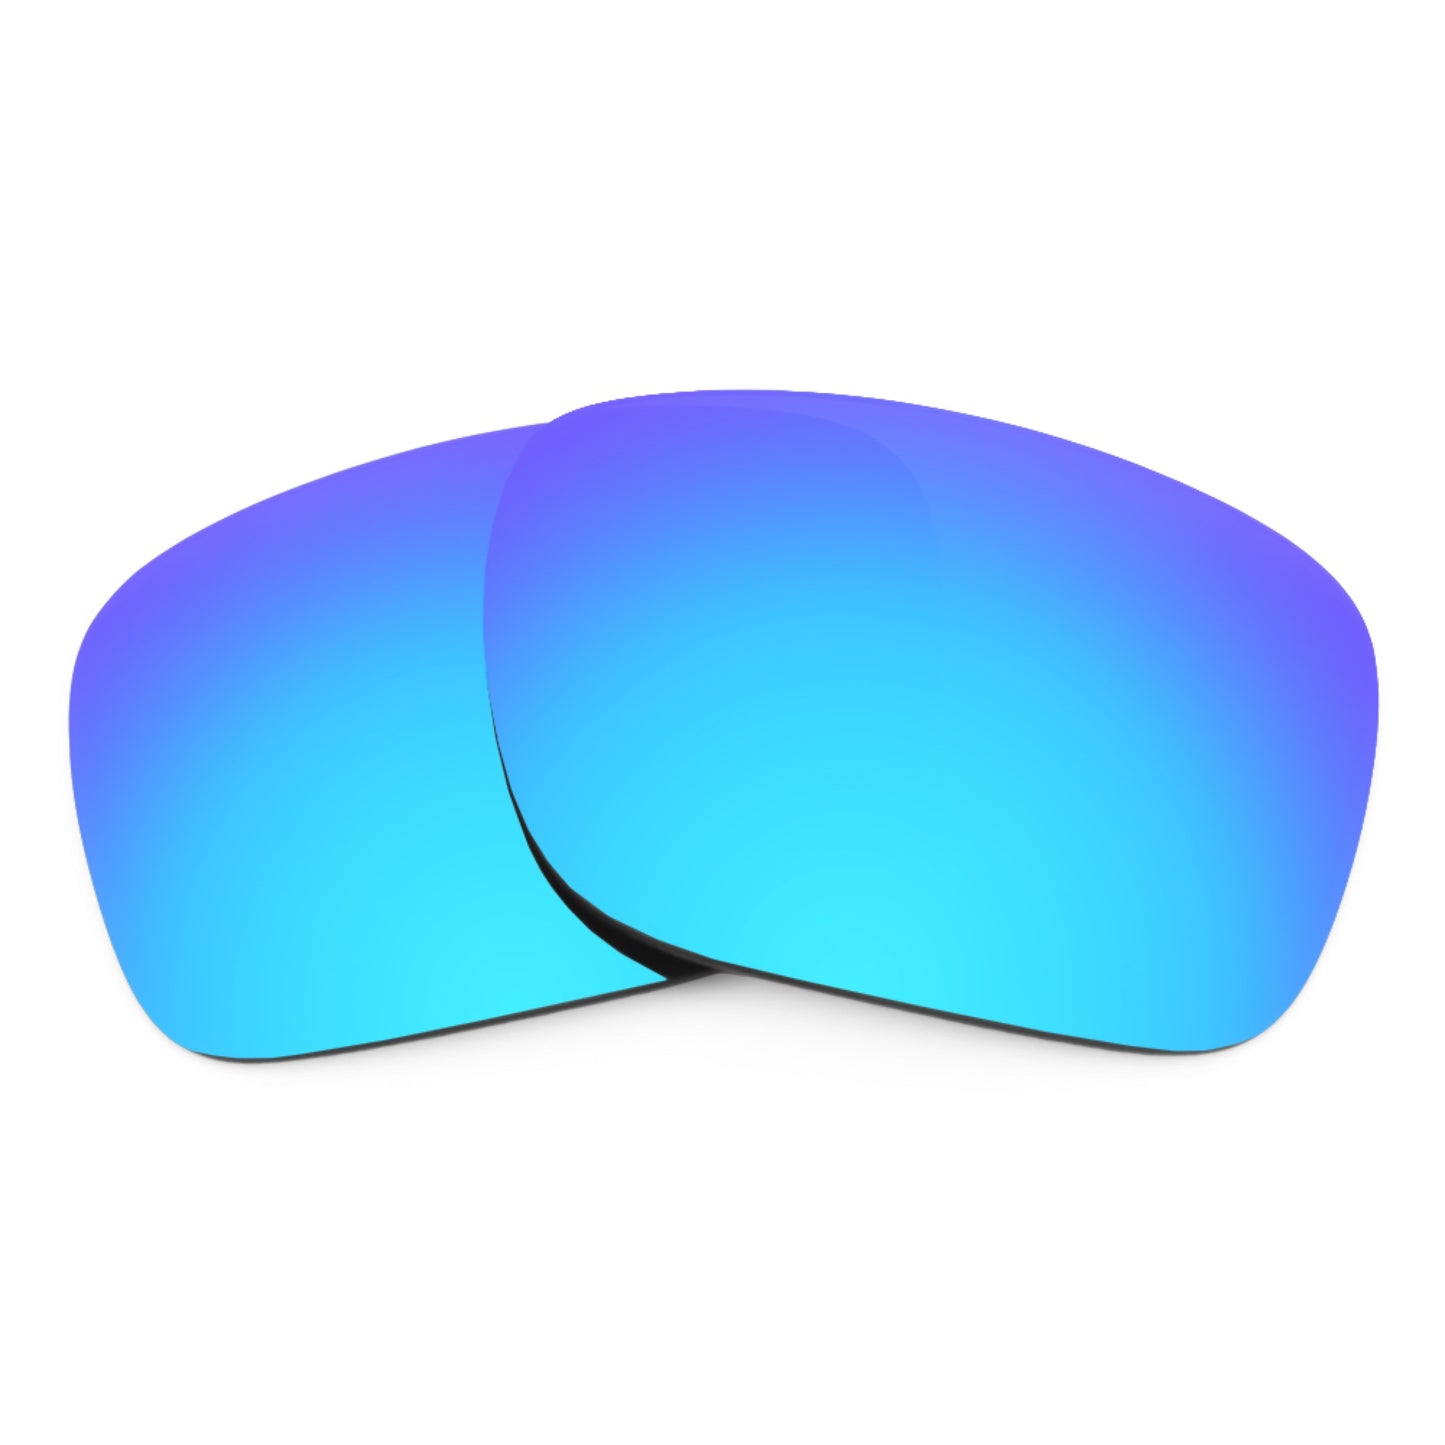 Revant replacement lenses for Ray-Ban RB3524 57mm Non-Polarized Ice Blue